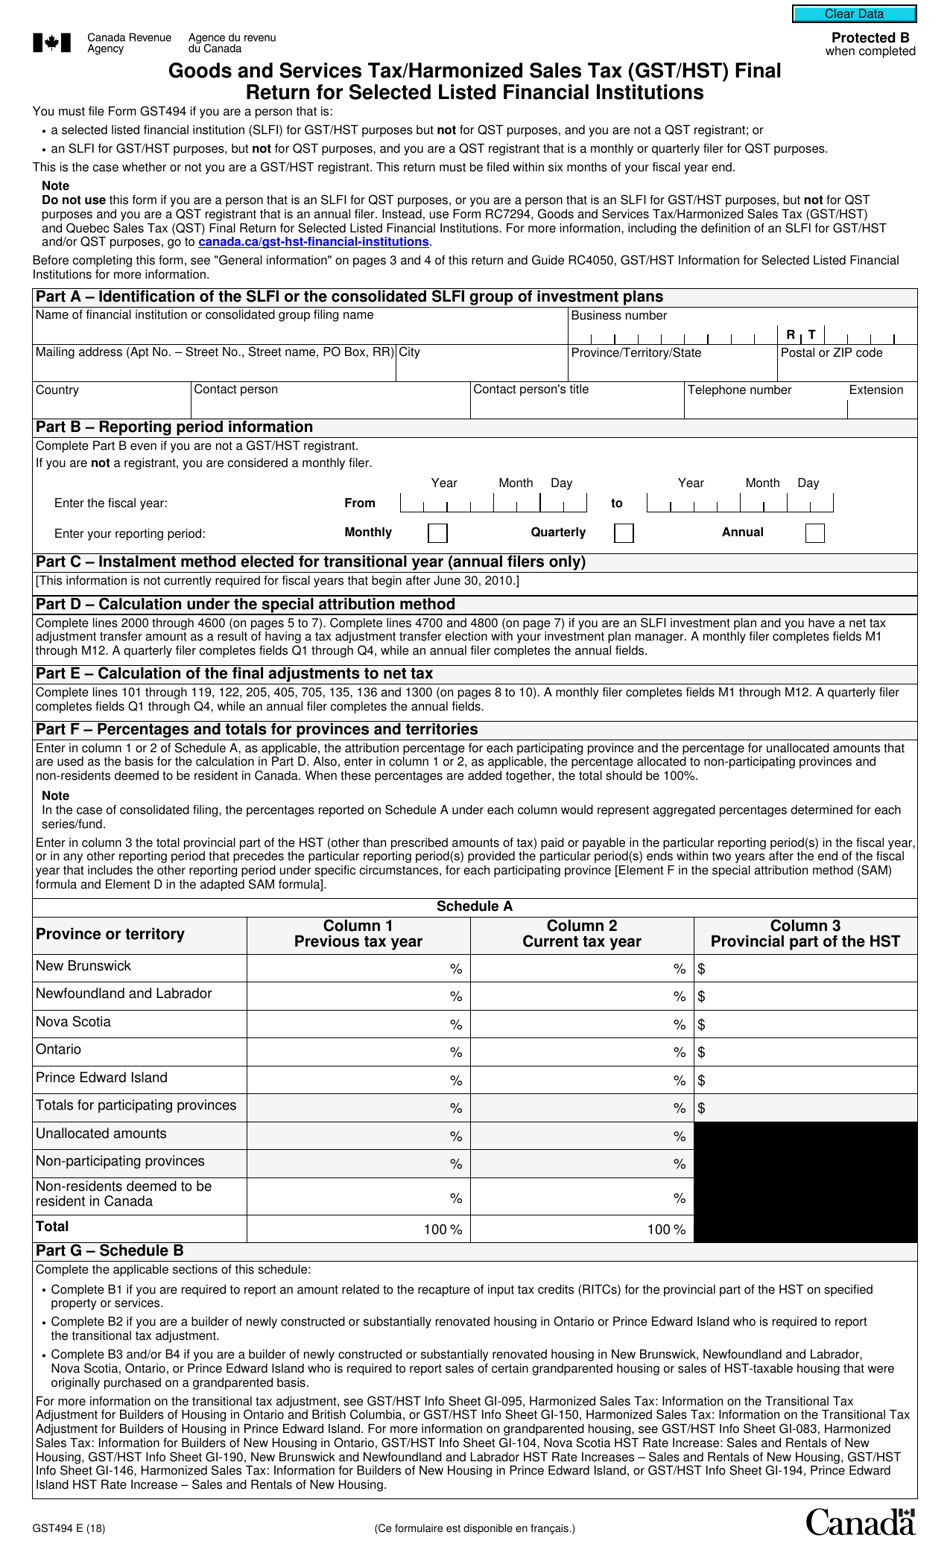 form-gst494-fill-out-sign-online-and-download-fillable-pdf-canada